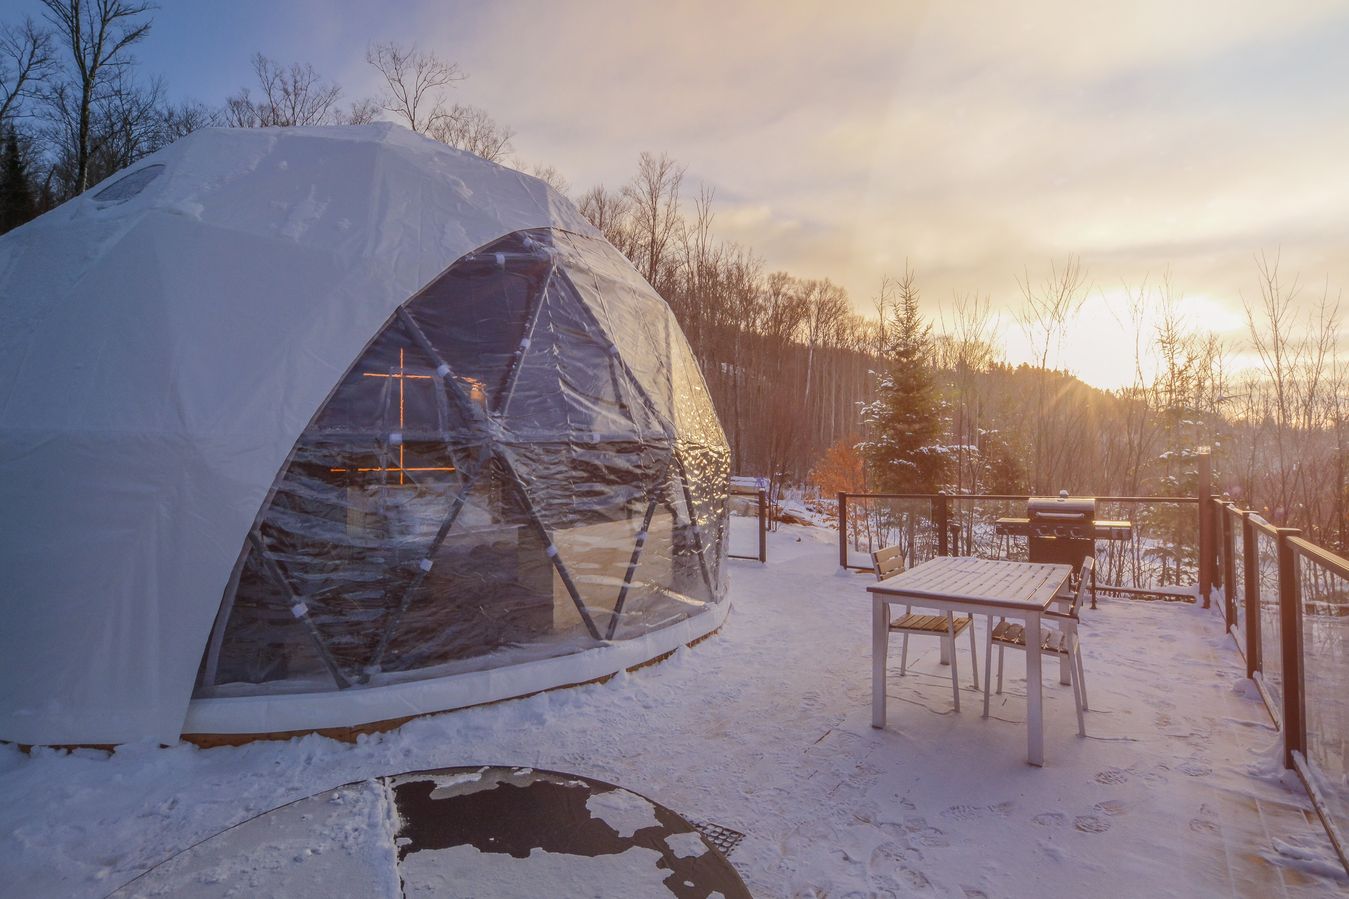 bubble hotel in Tremblant, Bel Air dome rentals